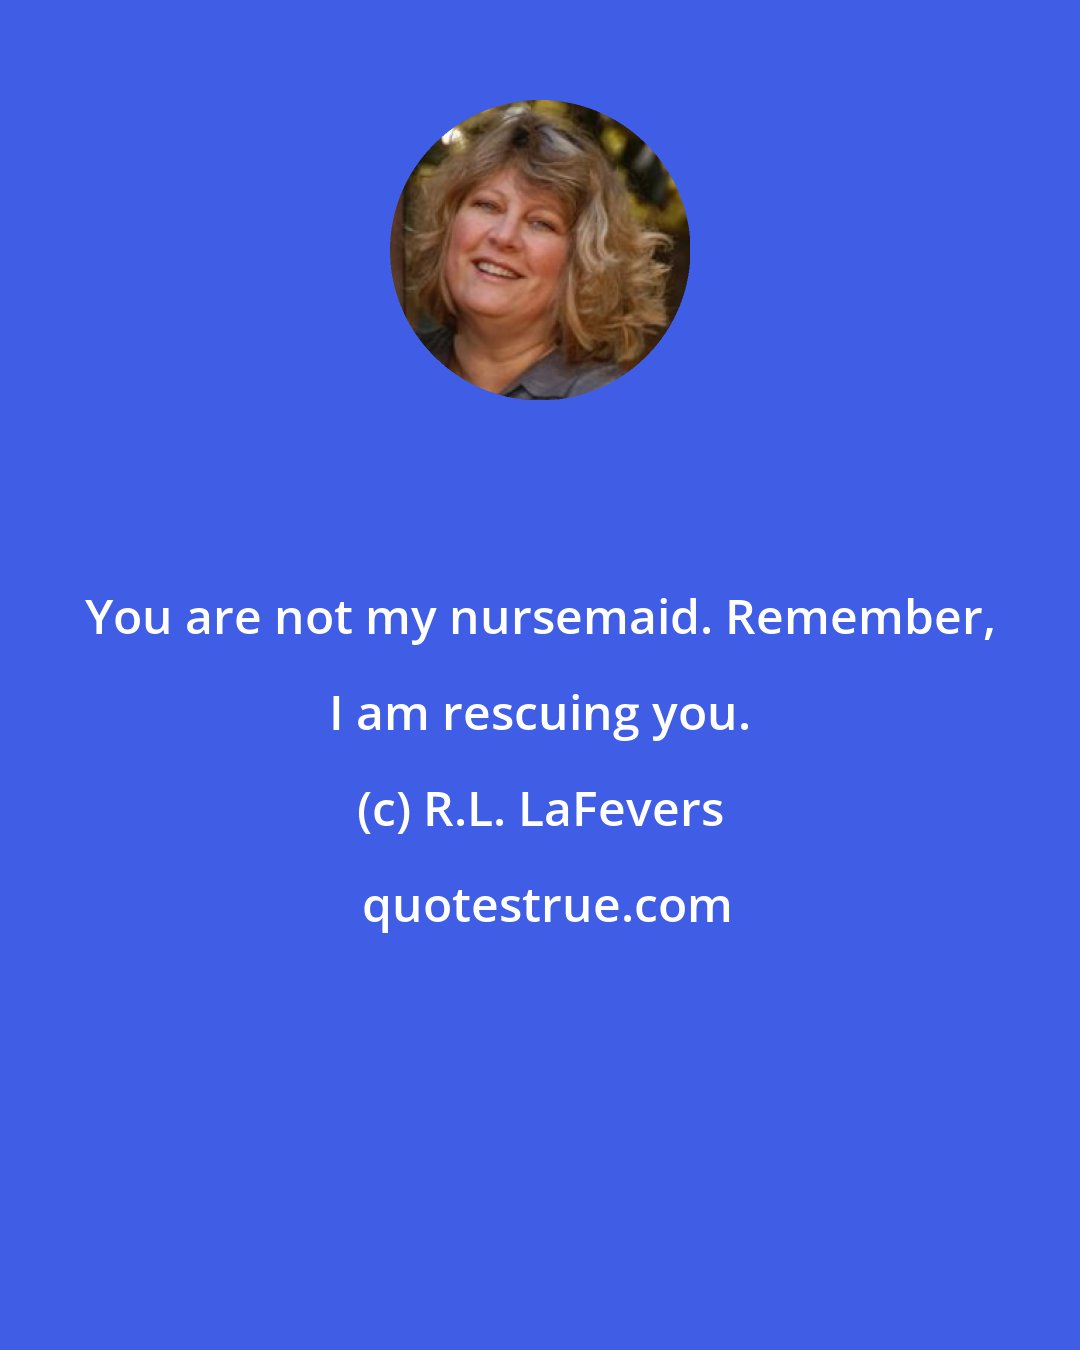 R.L. LaFevers: You are not my nursemaid. Remember, I am rescuing you.